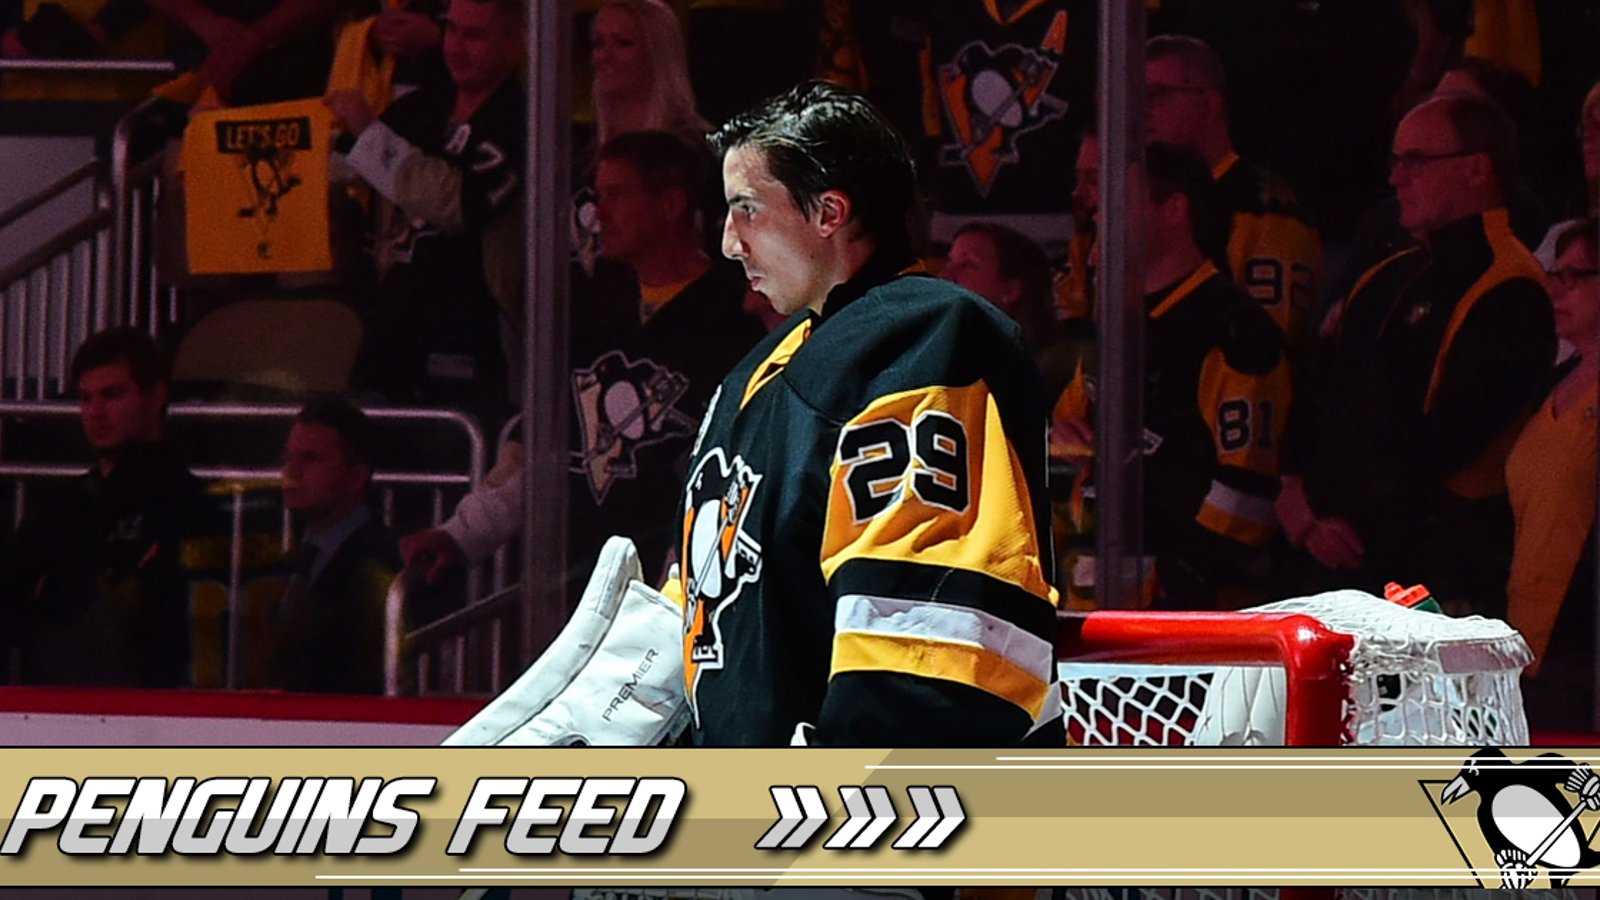 Pens Report: Marc-Andre Fleury comments on the tough situation he goes through.